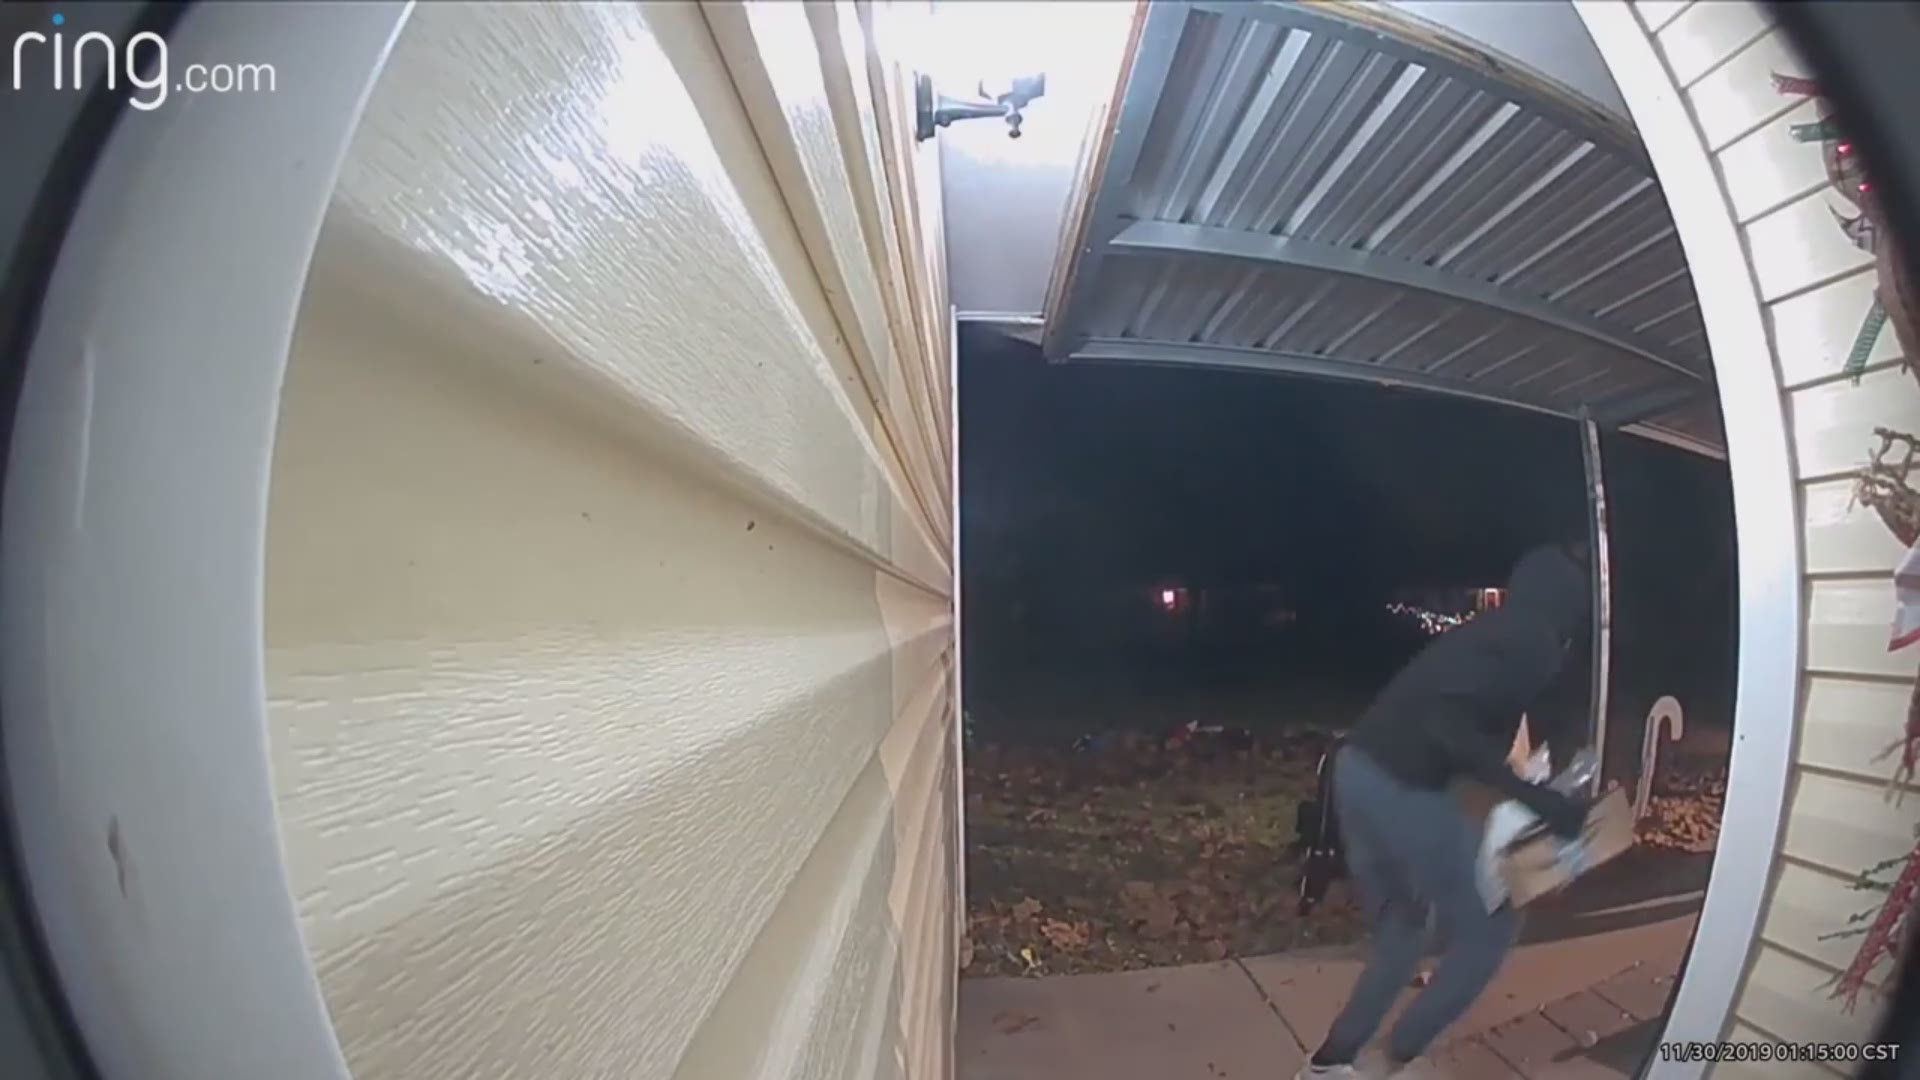 Police shared this video, asking for help in identifying the suspect who's seen stealing packages from a porch on Beagle Drive in Little Cypress